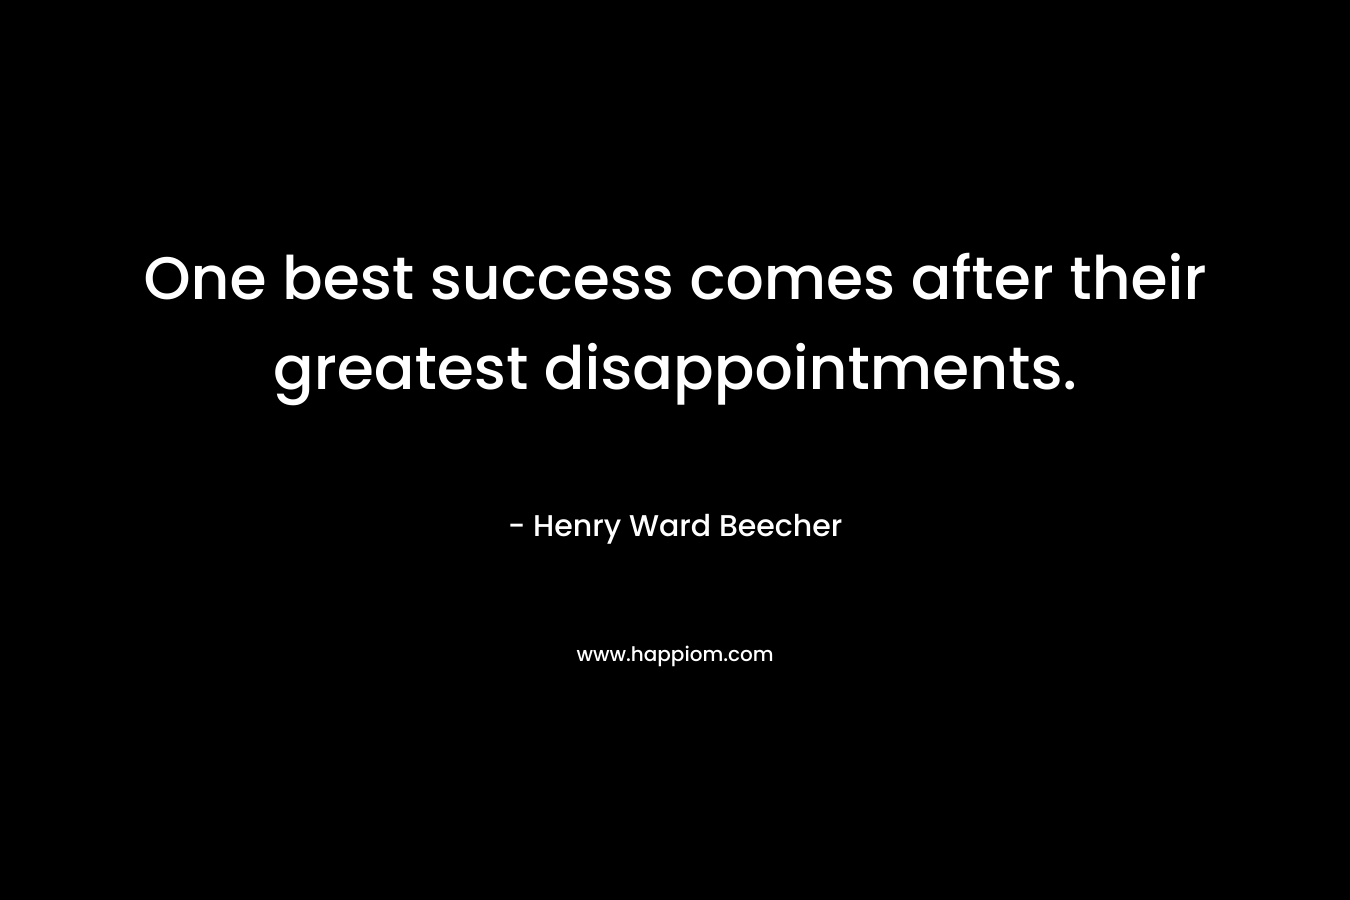 One best success comes after their greatest disappointments.